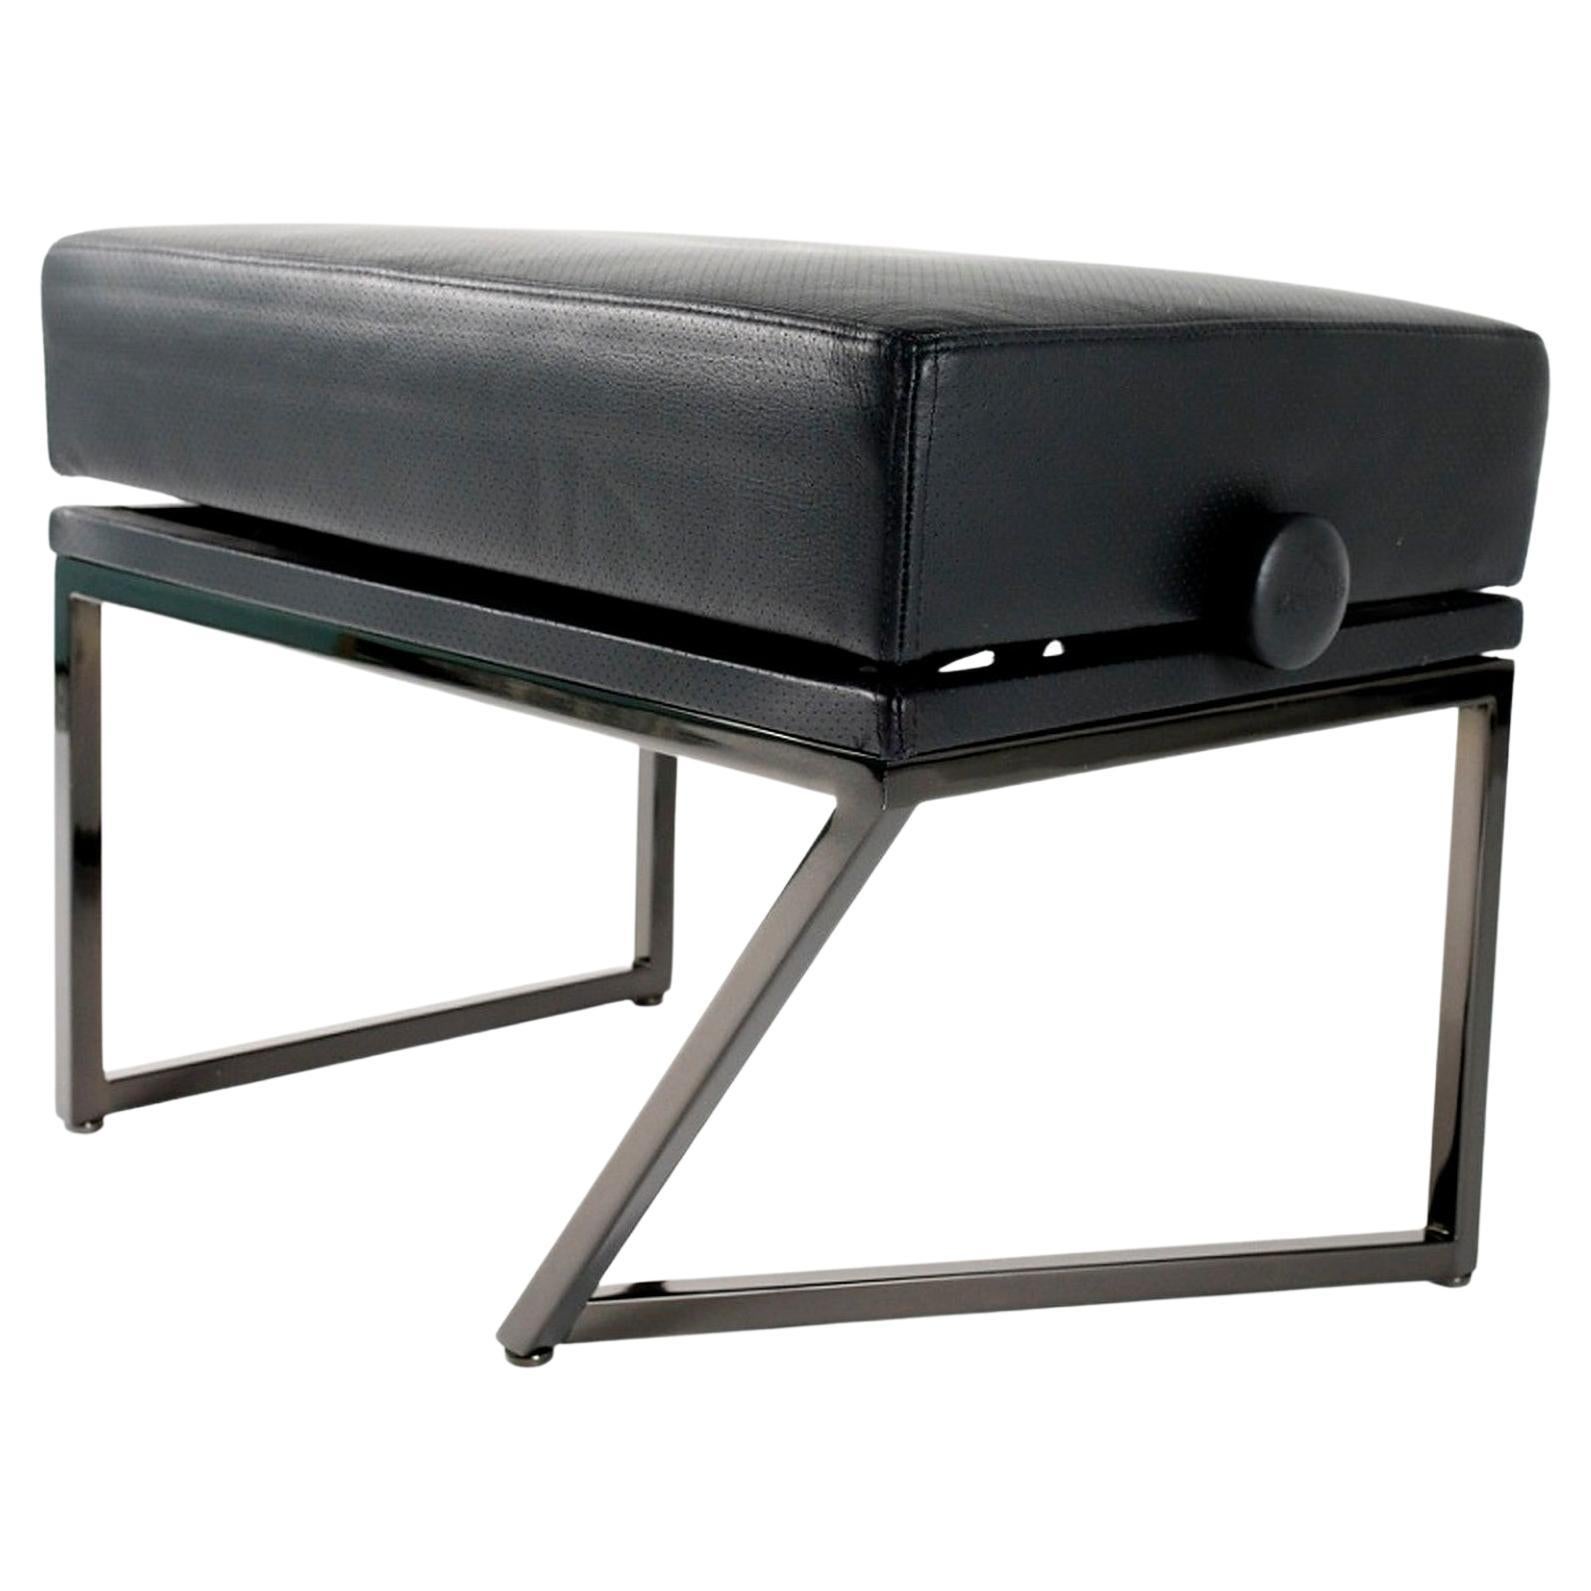 Upholstered Piano Stool Plated in Black Nickel. Height Adjustable Piano Bench, 